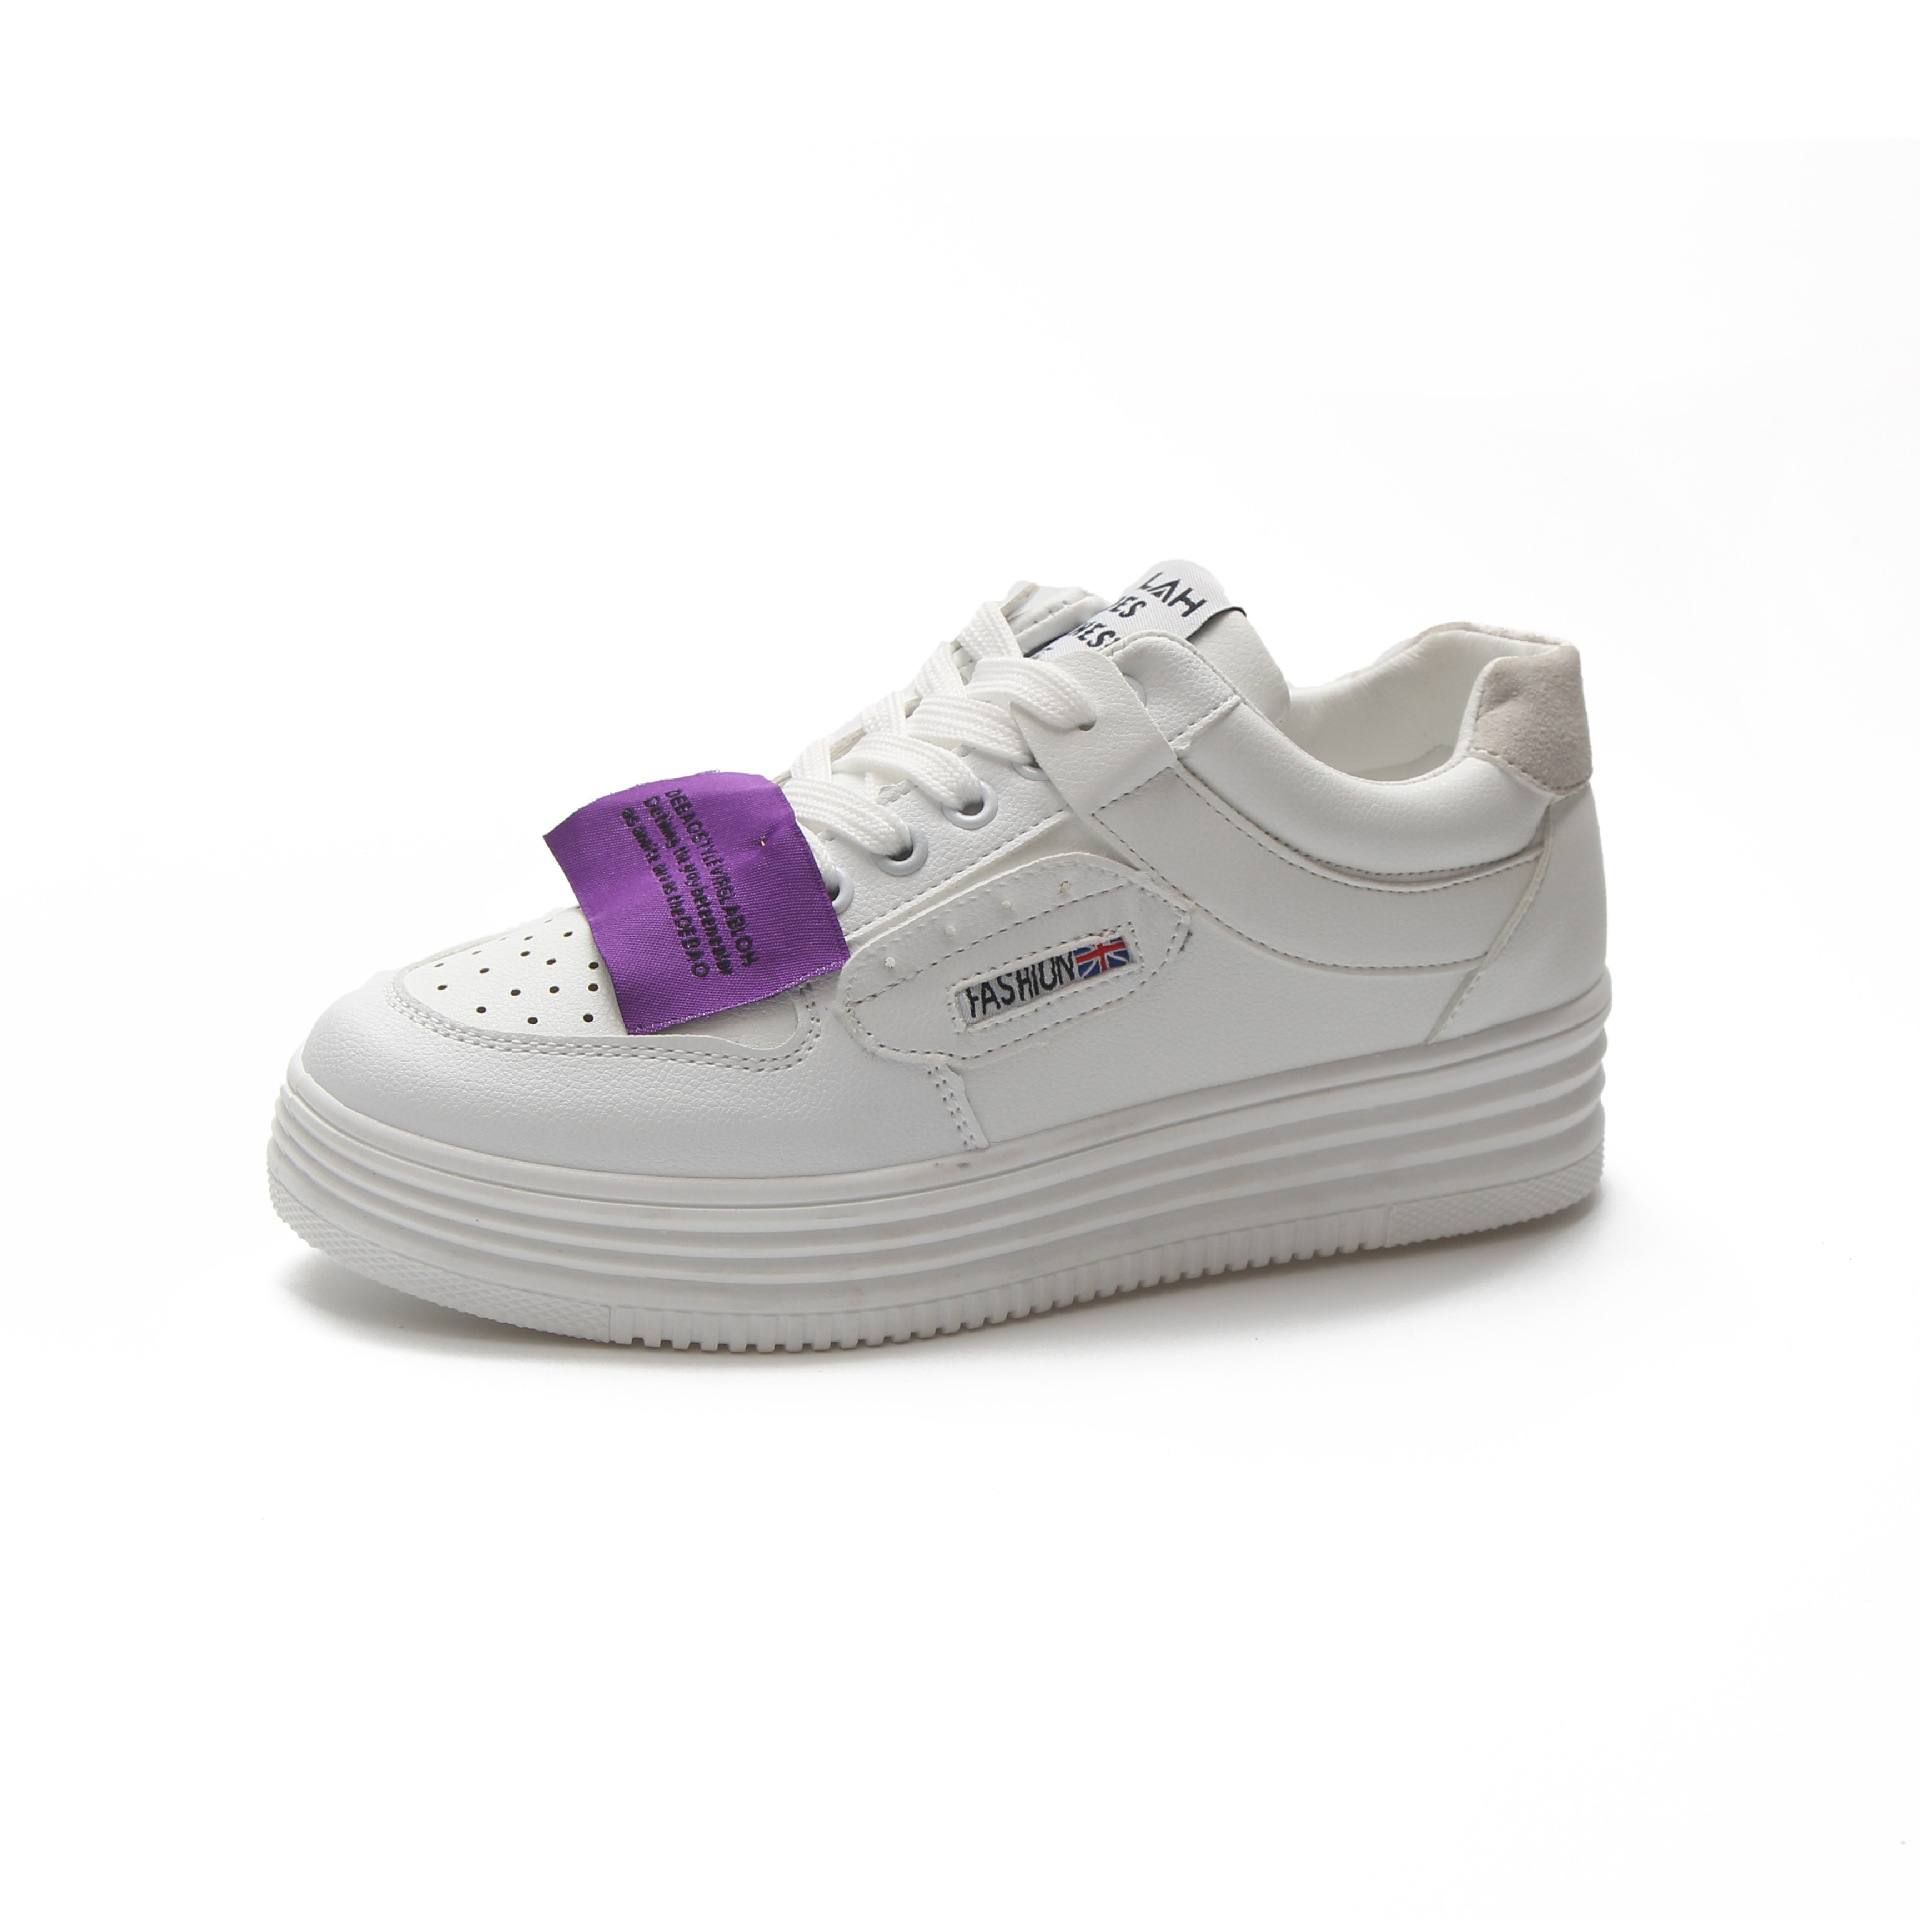 Small white shoes female recreational board shoes breathable prevent slippery thick bottom